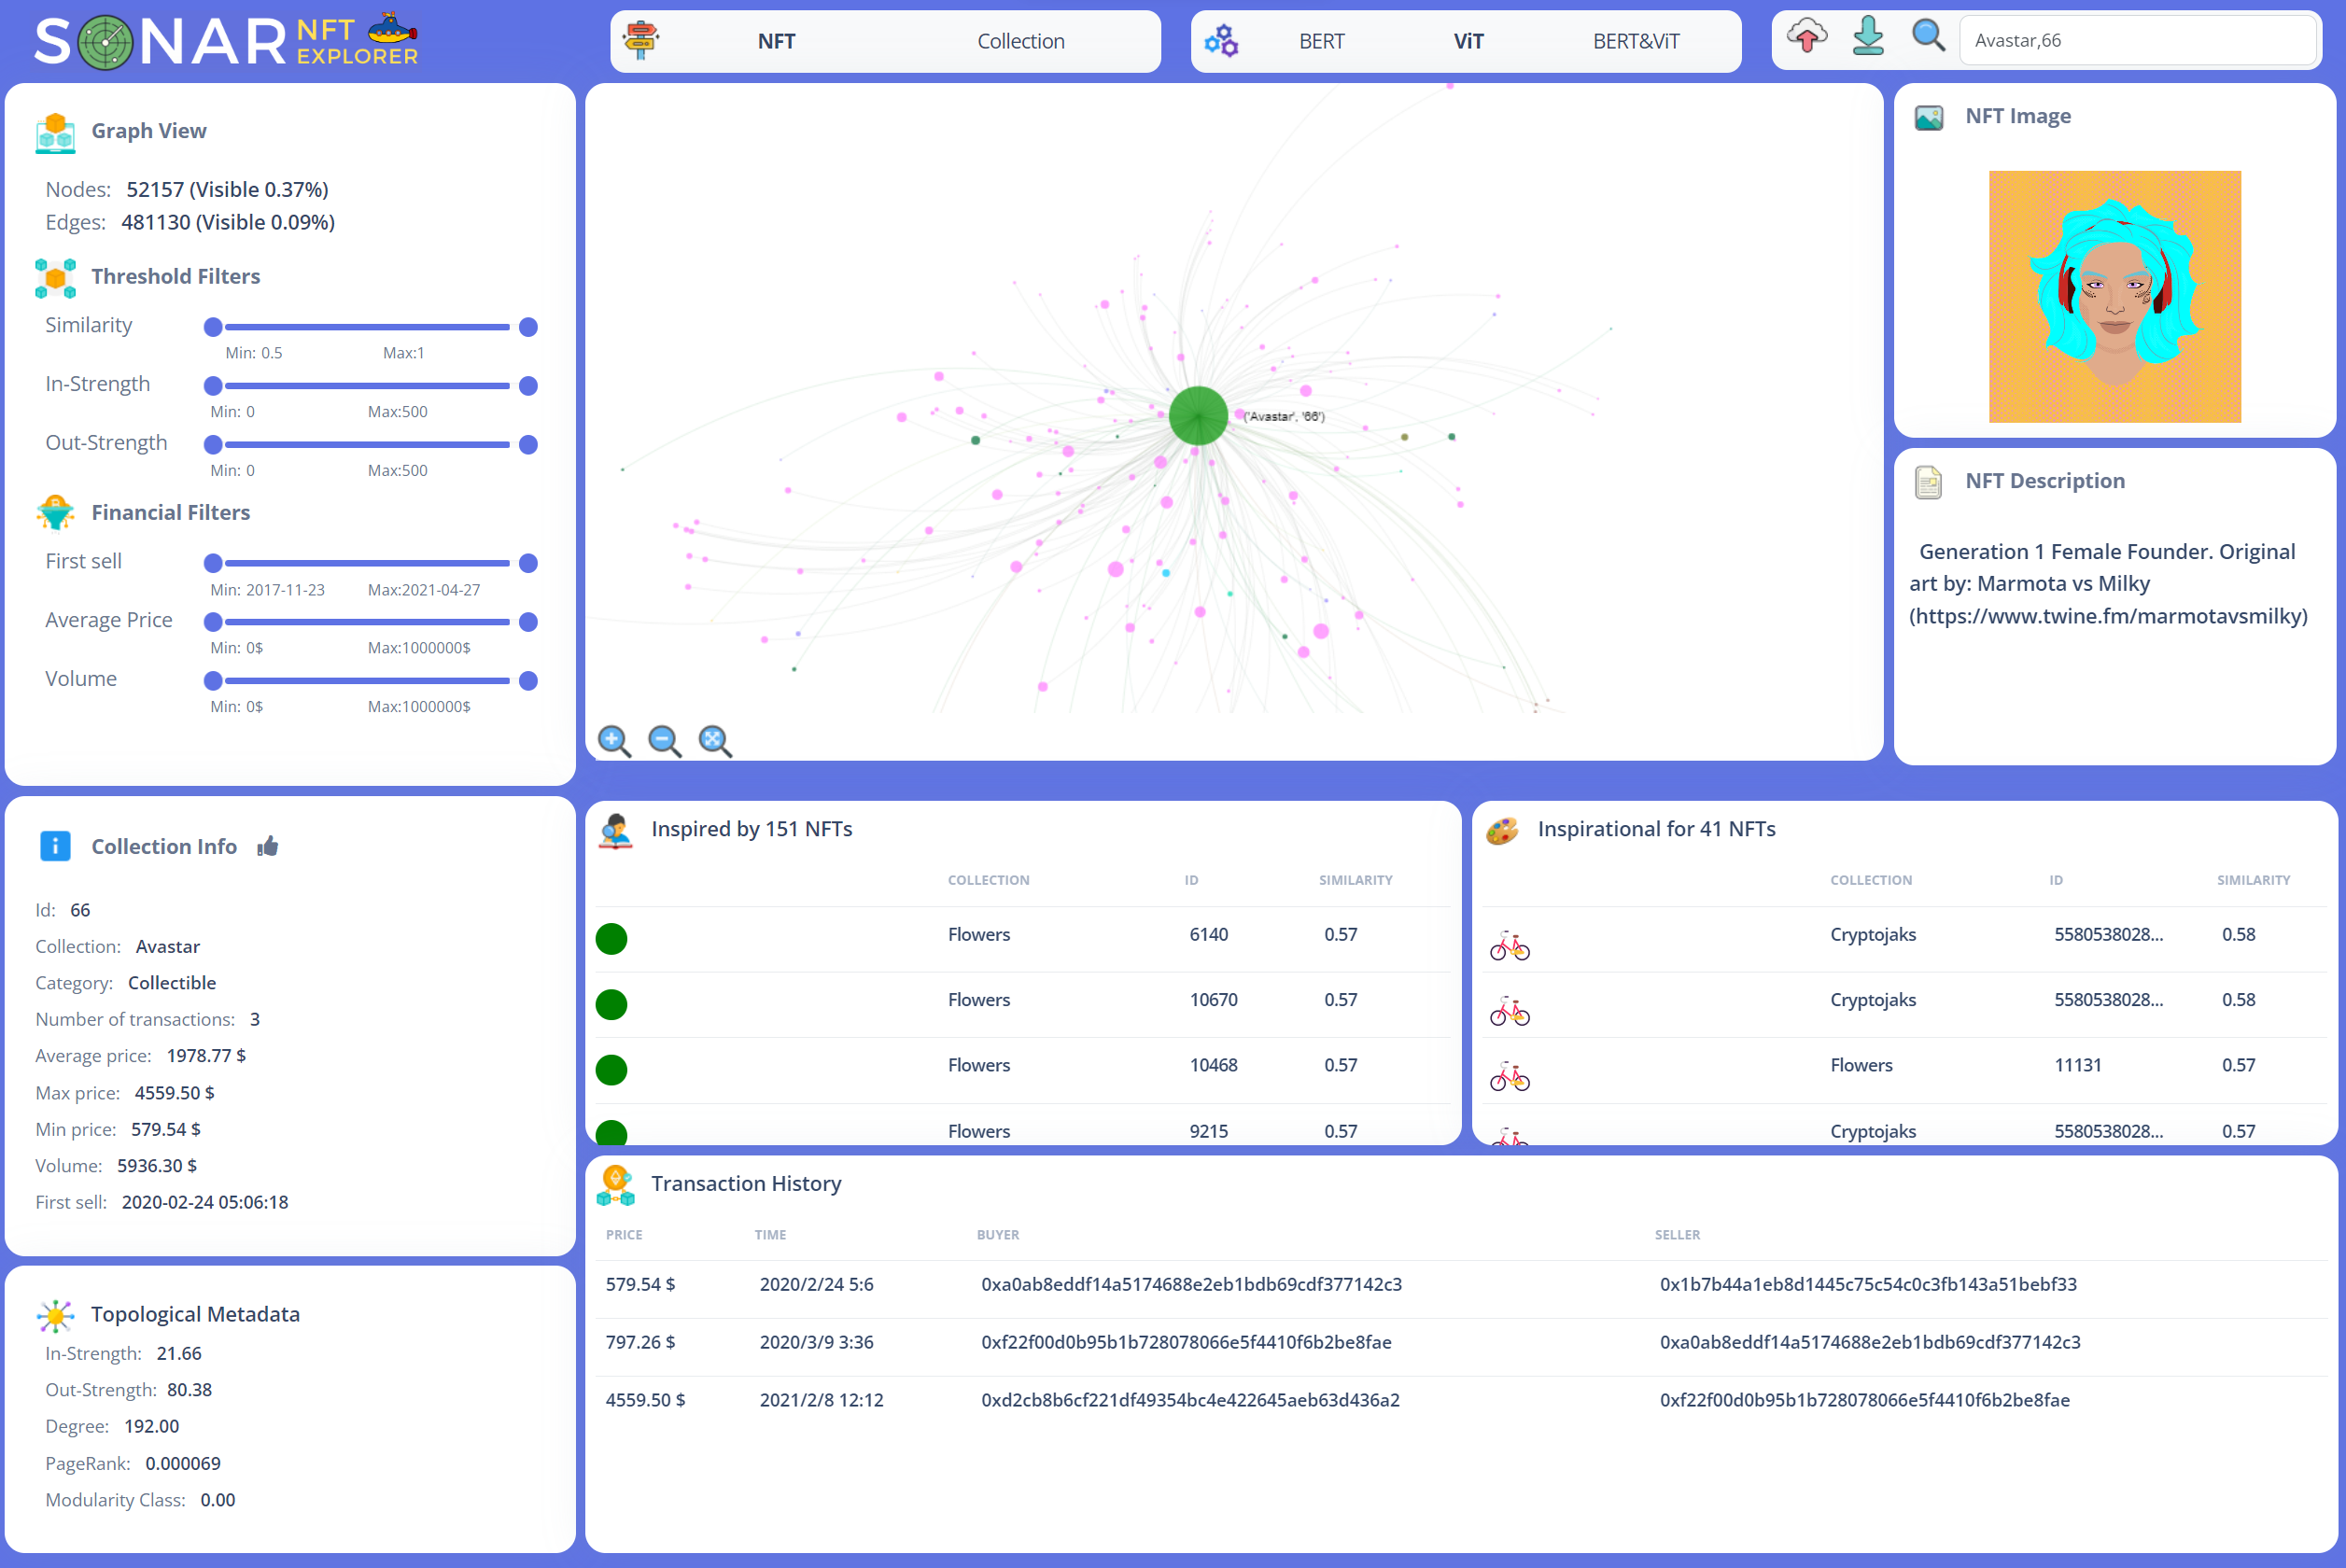 SONAR - A Web-based tool for multi-modal exploration of Non-Fungible Token Inspiration Networks